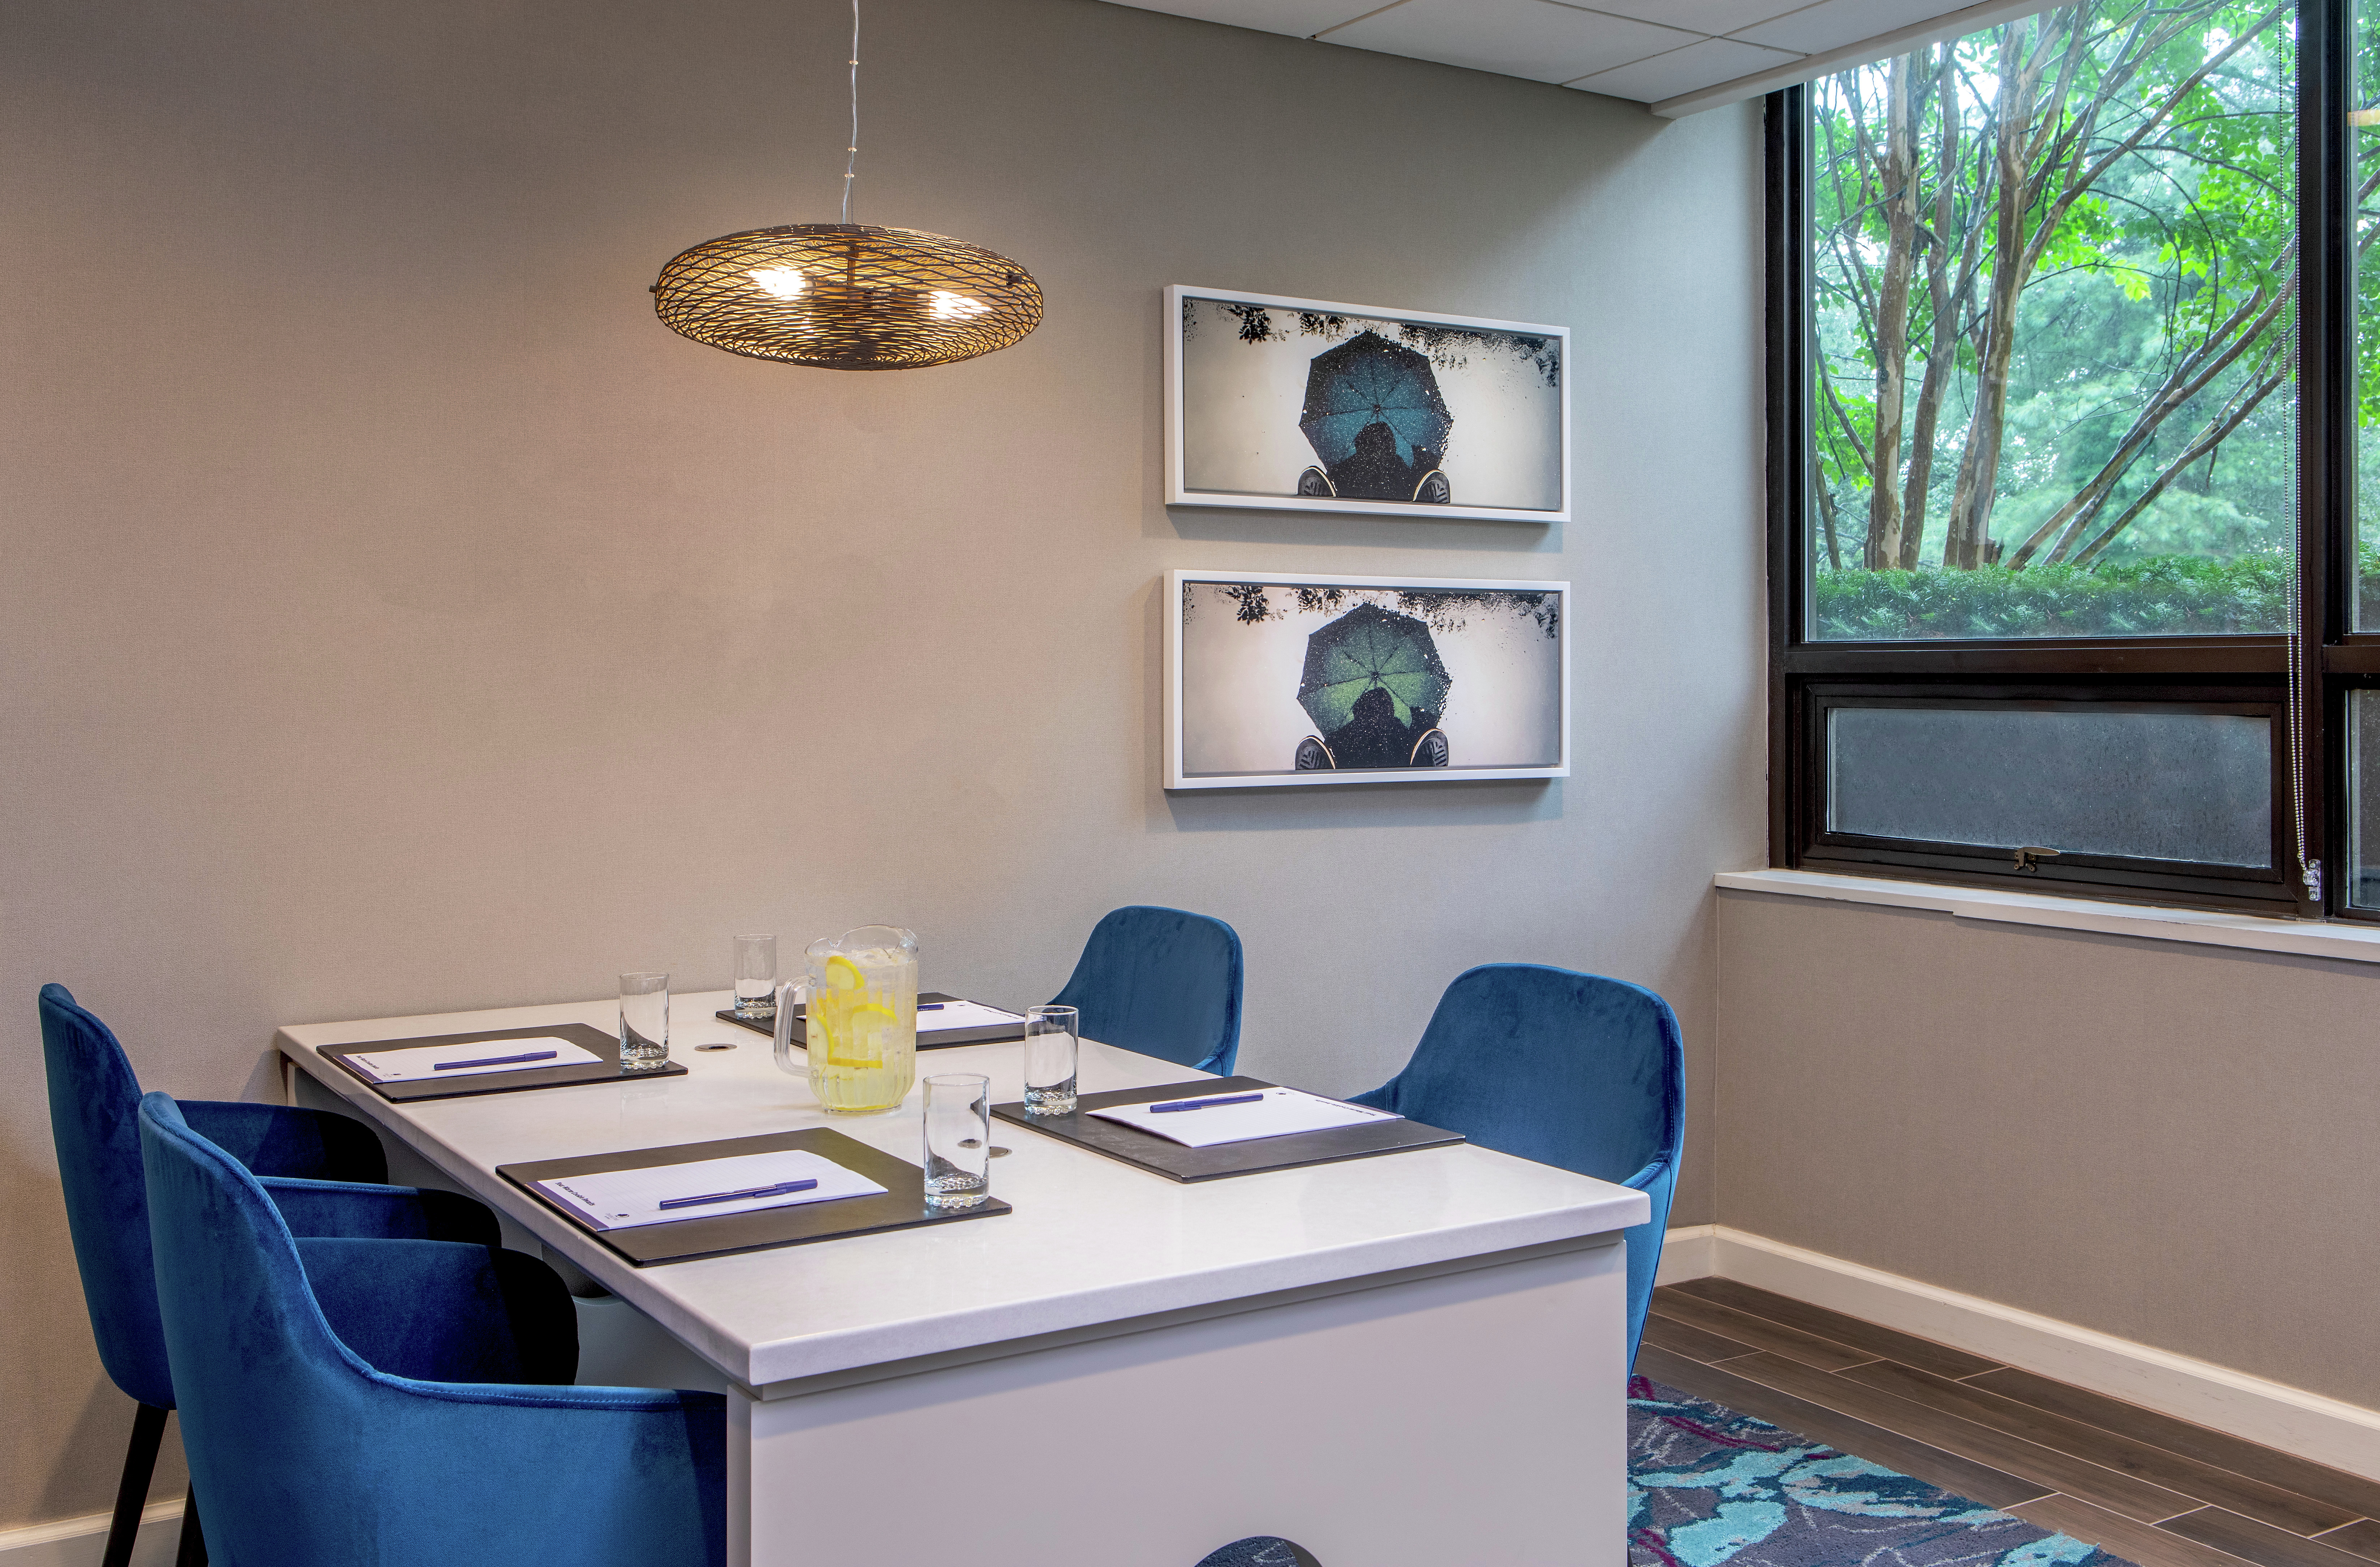 Plan One-on-One or Small Group Meetings in our Patapsco Room